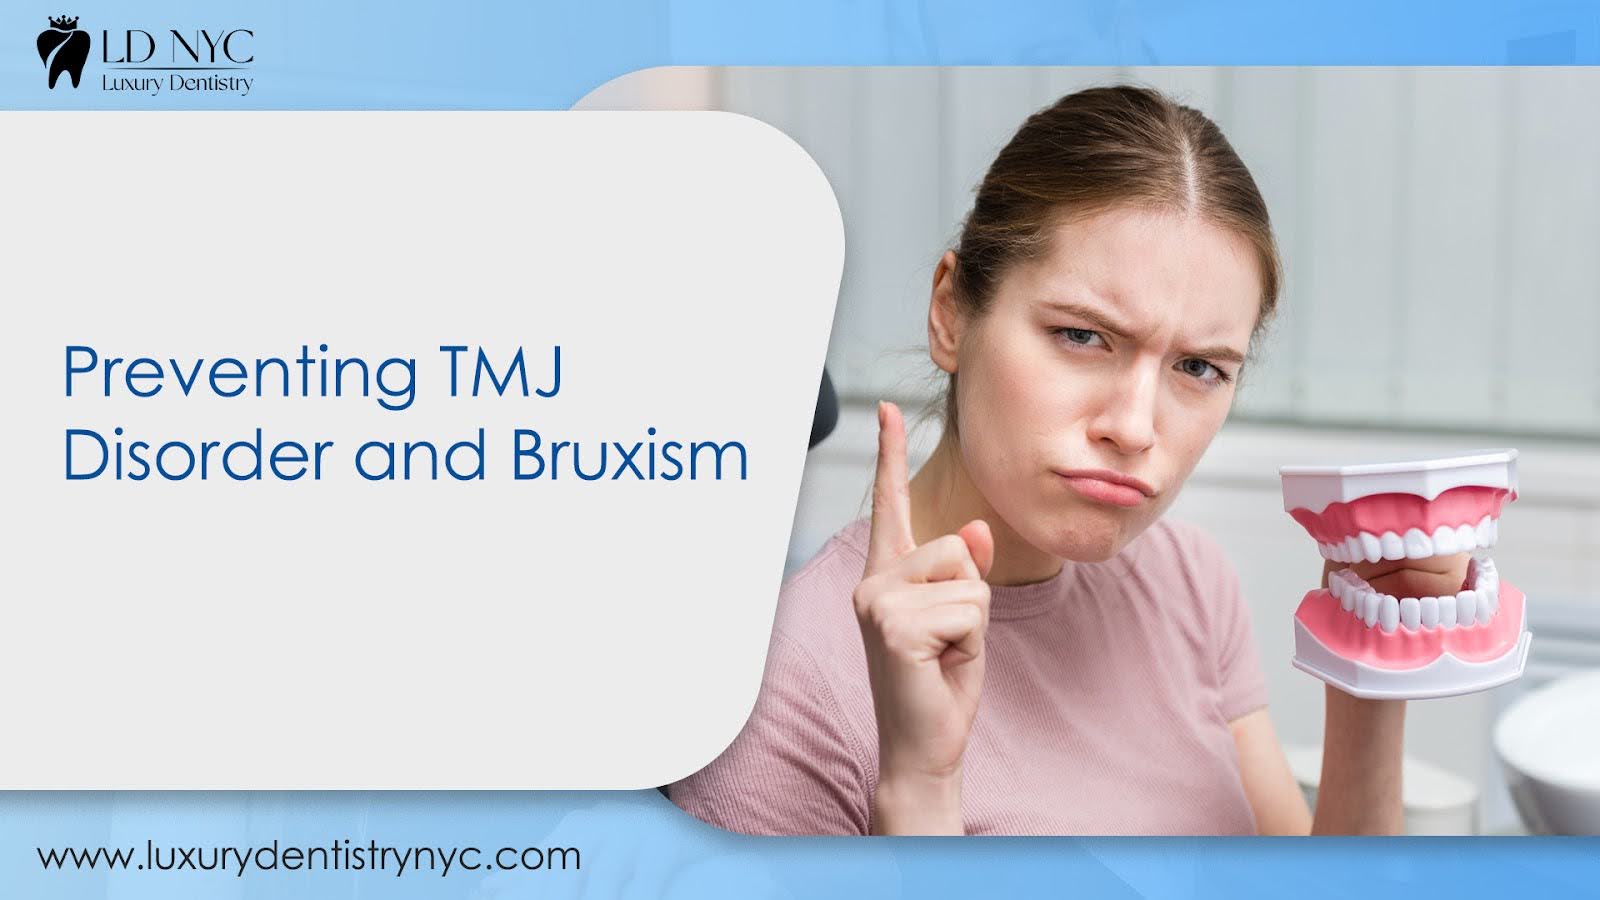 Preventing TMJ Disorder and Bruxism